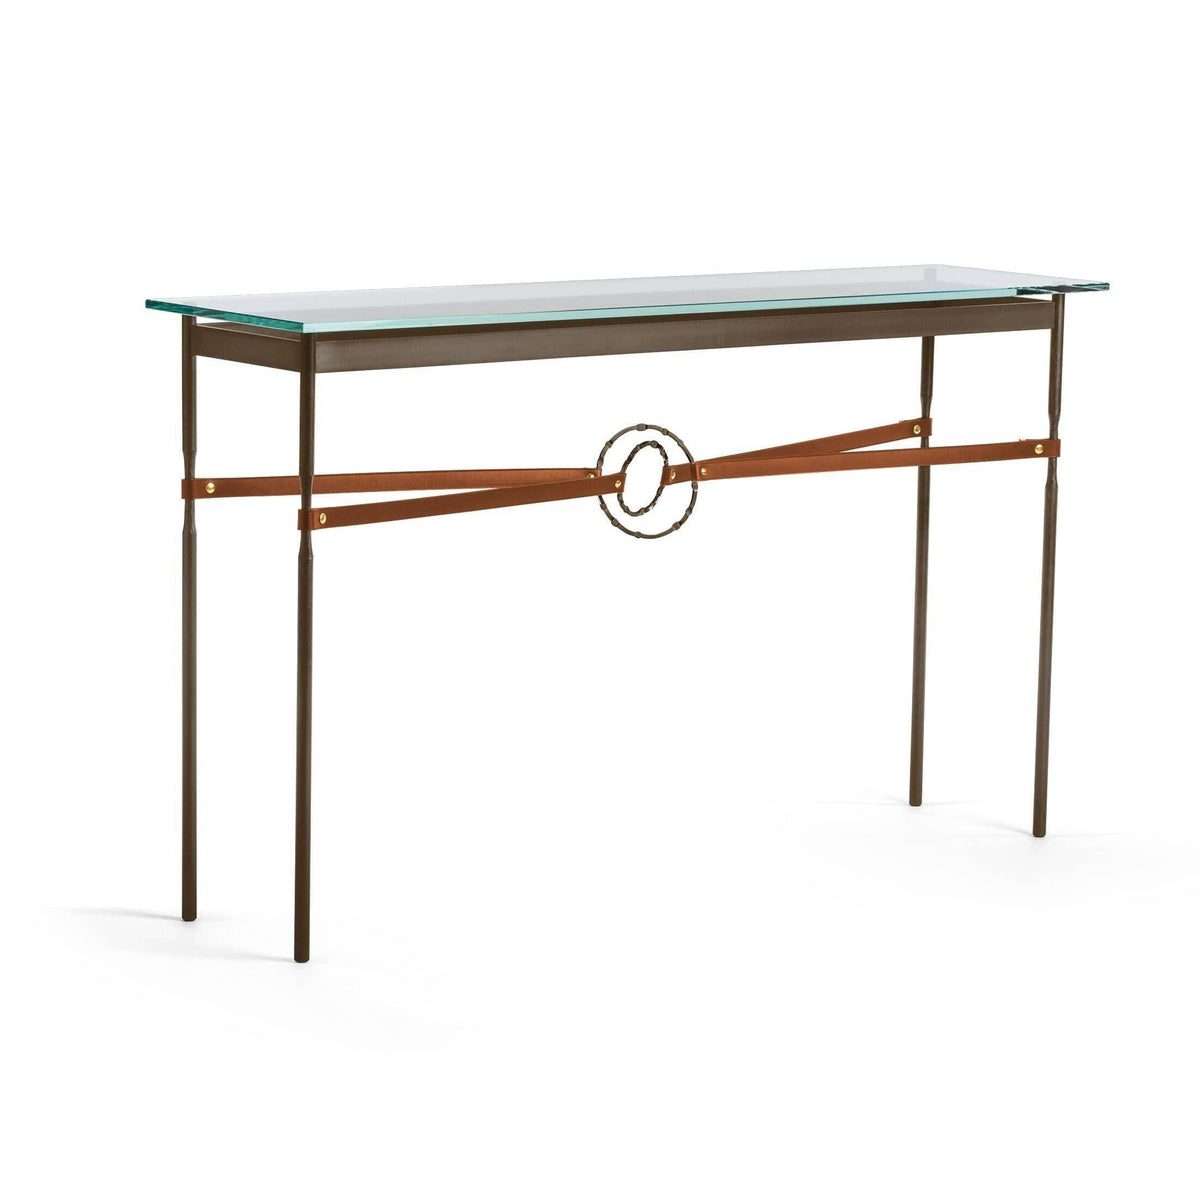 Hubbardton Forge - Equus Chestnut Leather Console Table - 750118-05-05-LC-VA0714 | Montreal Lighting & Hardware